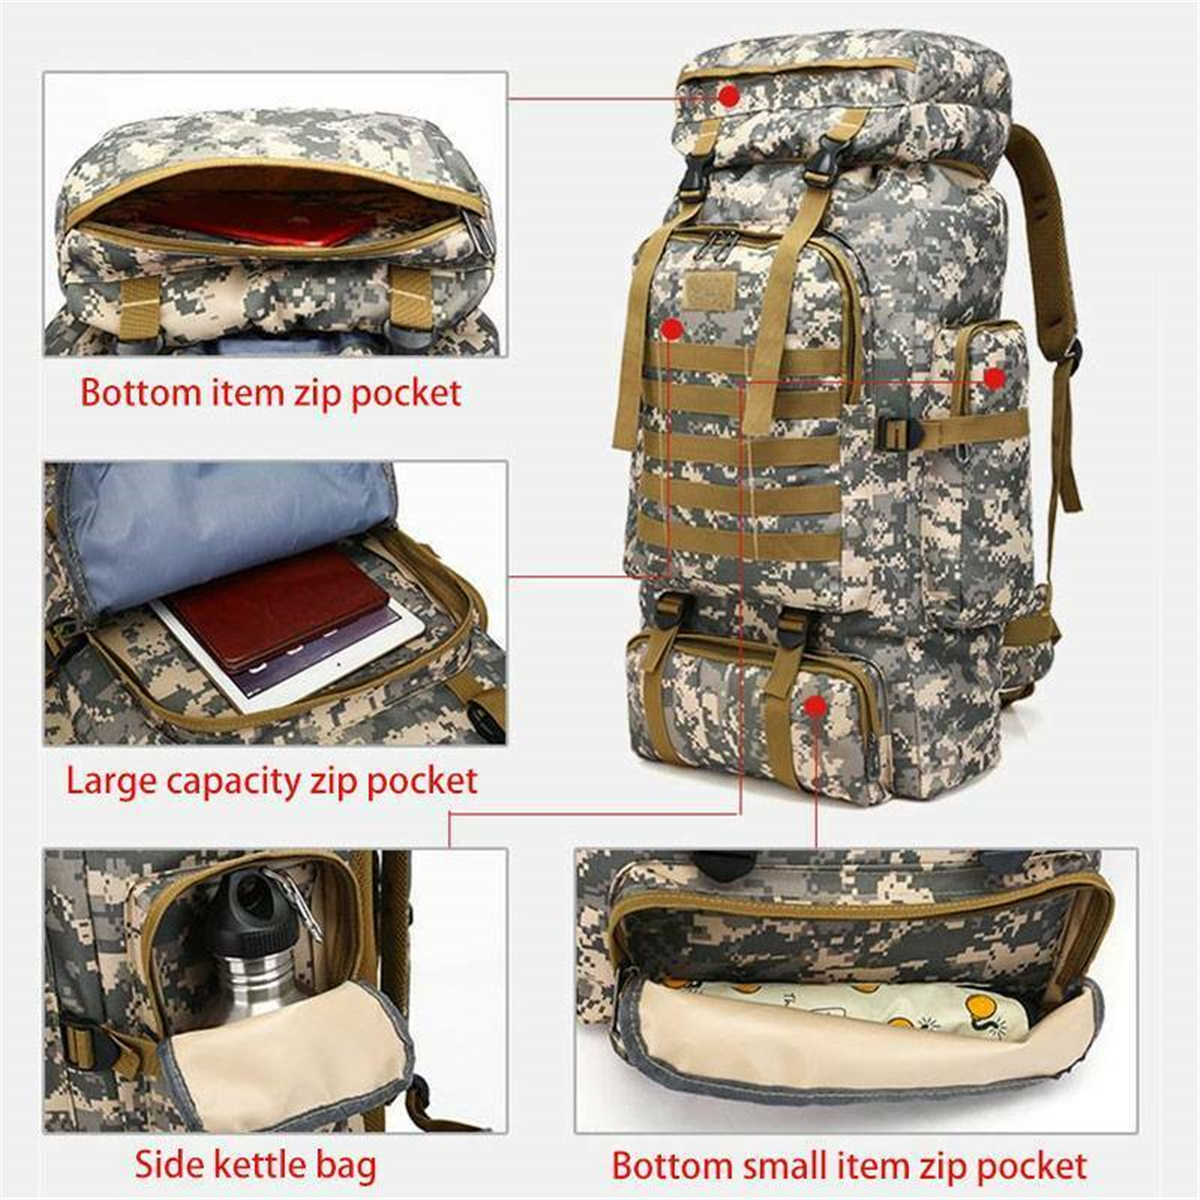 80L-Molle-Tactical-Bag-Outdoor-Traveling-Camping-Hiking-Military-Rucksacks-Backpack-Camouflage-Bag-1556947-5